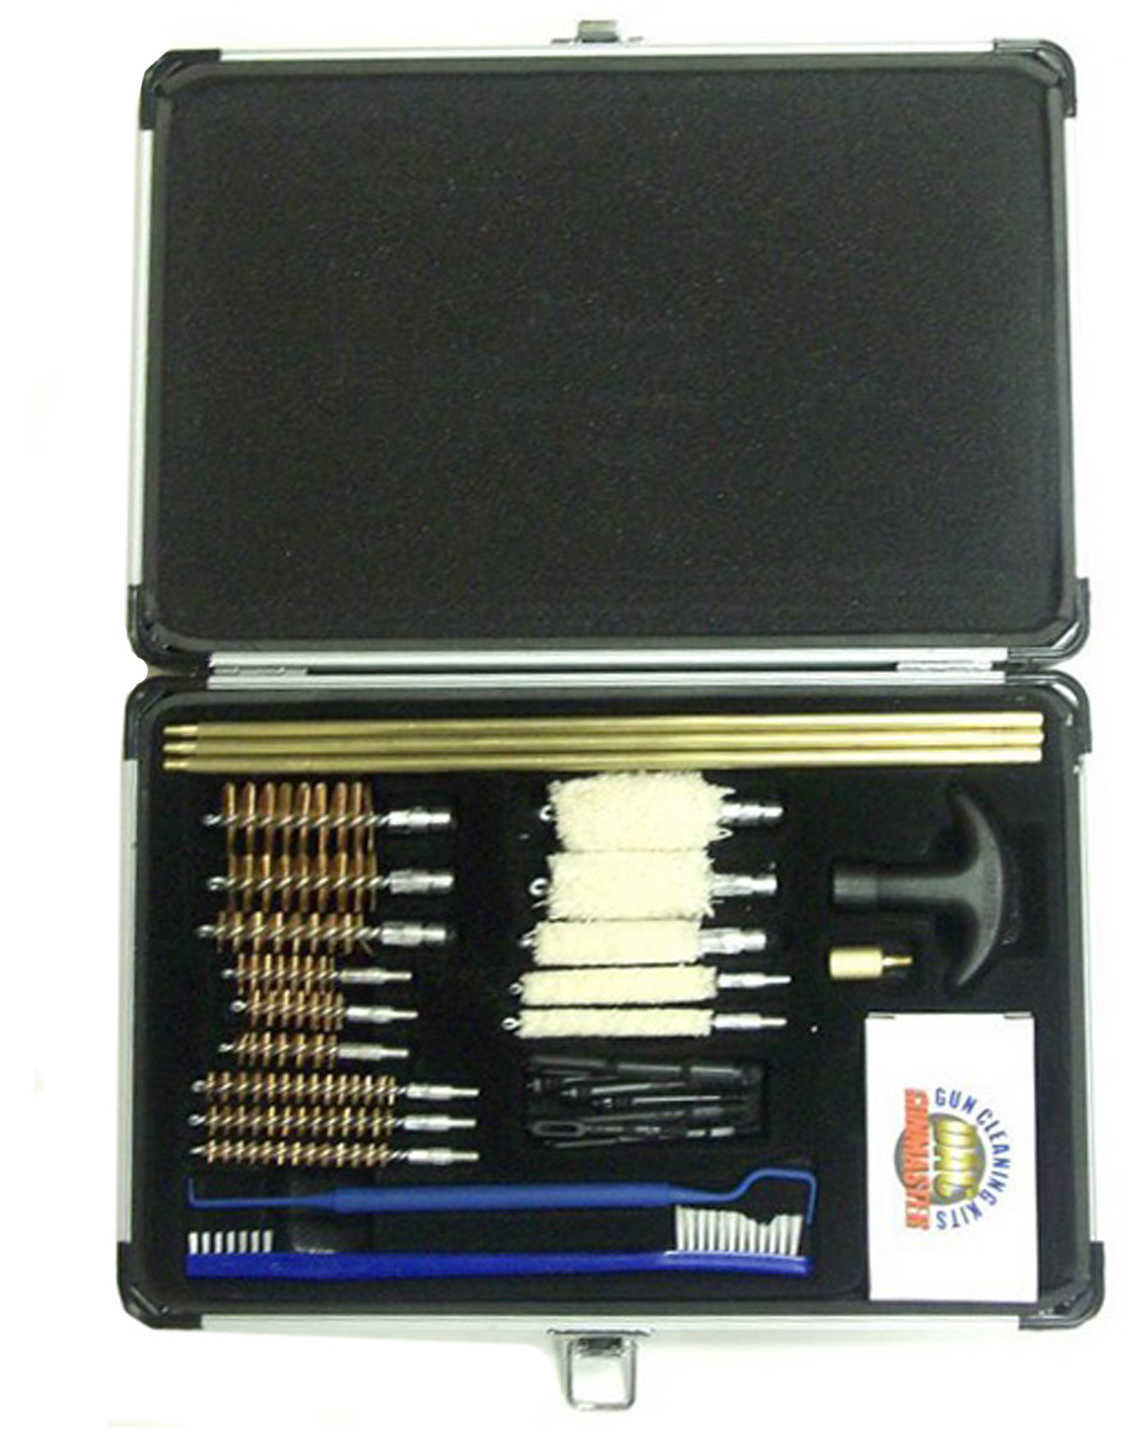 Universal 30 Piece Gun Cleaning Kit Aluminum Case - .22 Cal & larger 1 PSH System Handle Set Of Solid Brass rods